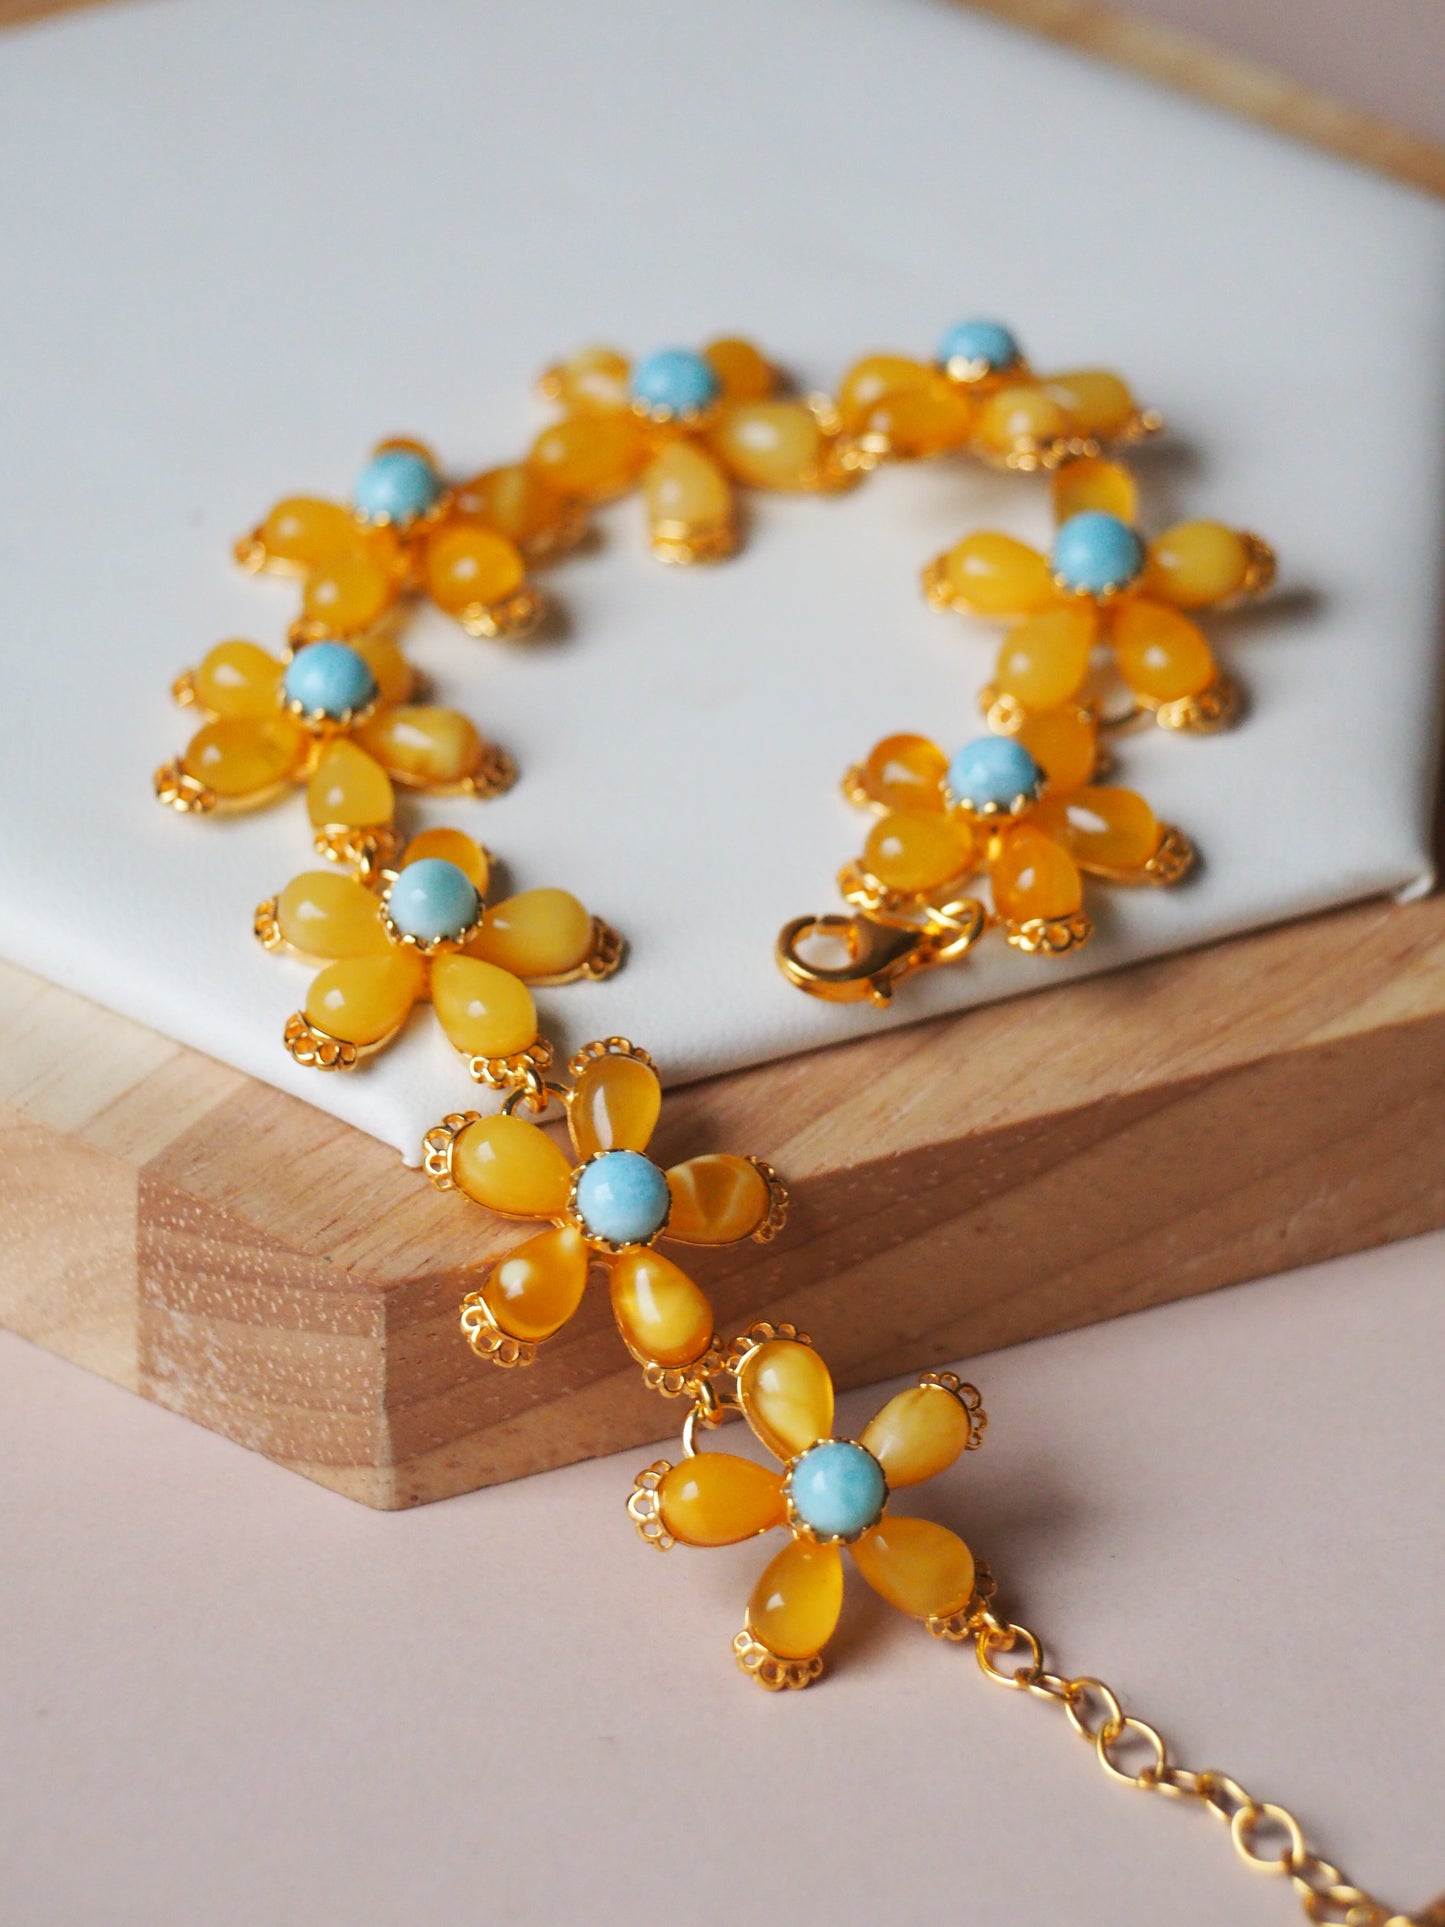 Natural Butterscotch/ Honey/ Royal White Amber Bracelet with Larimar